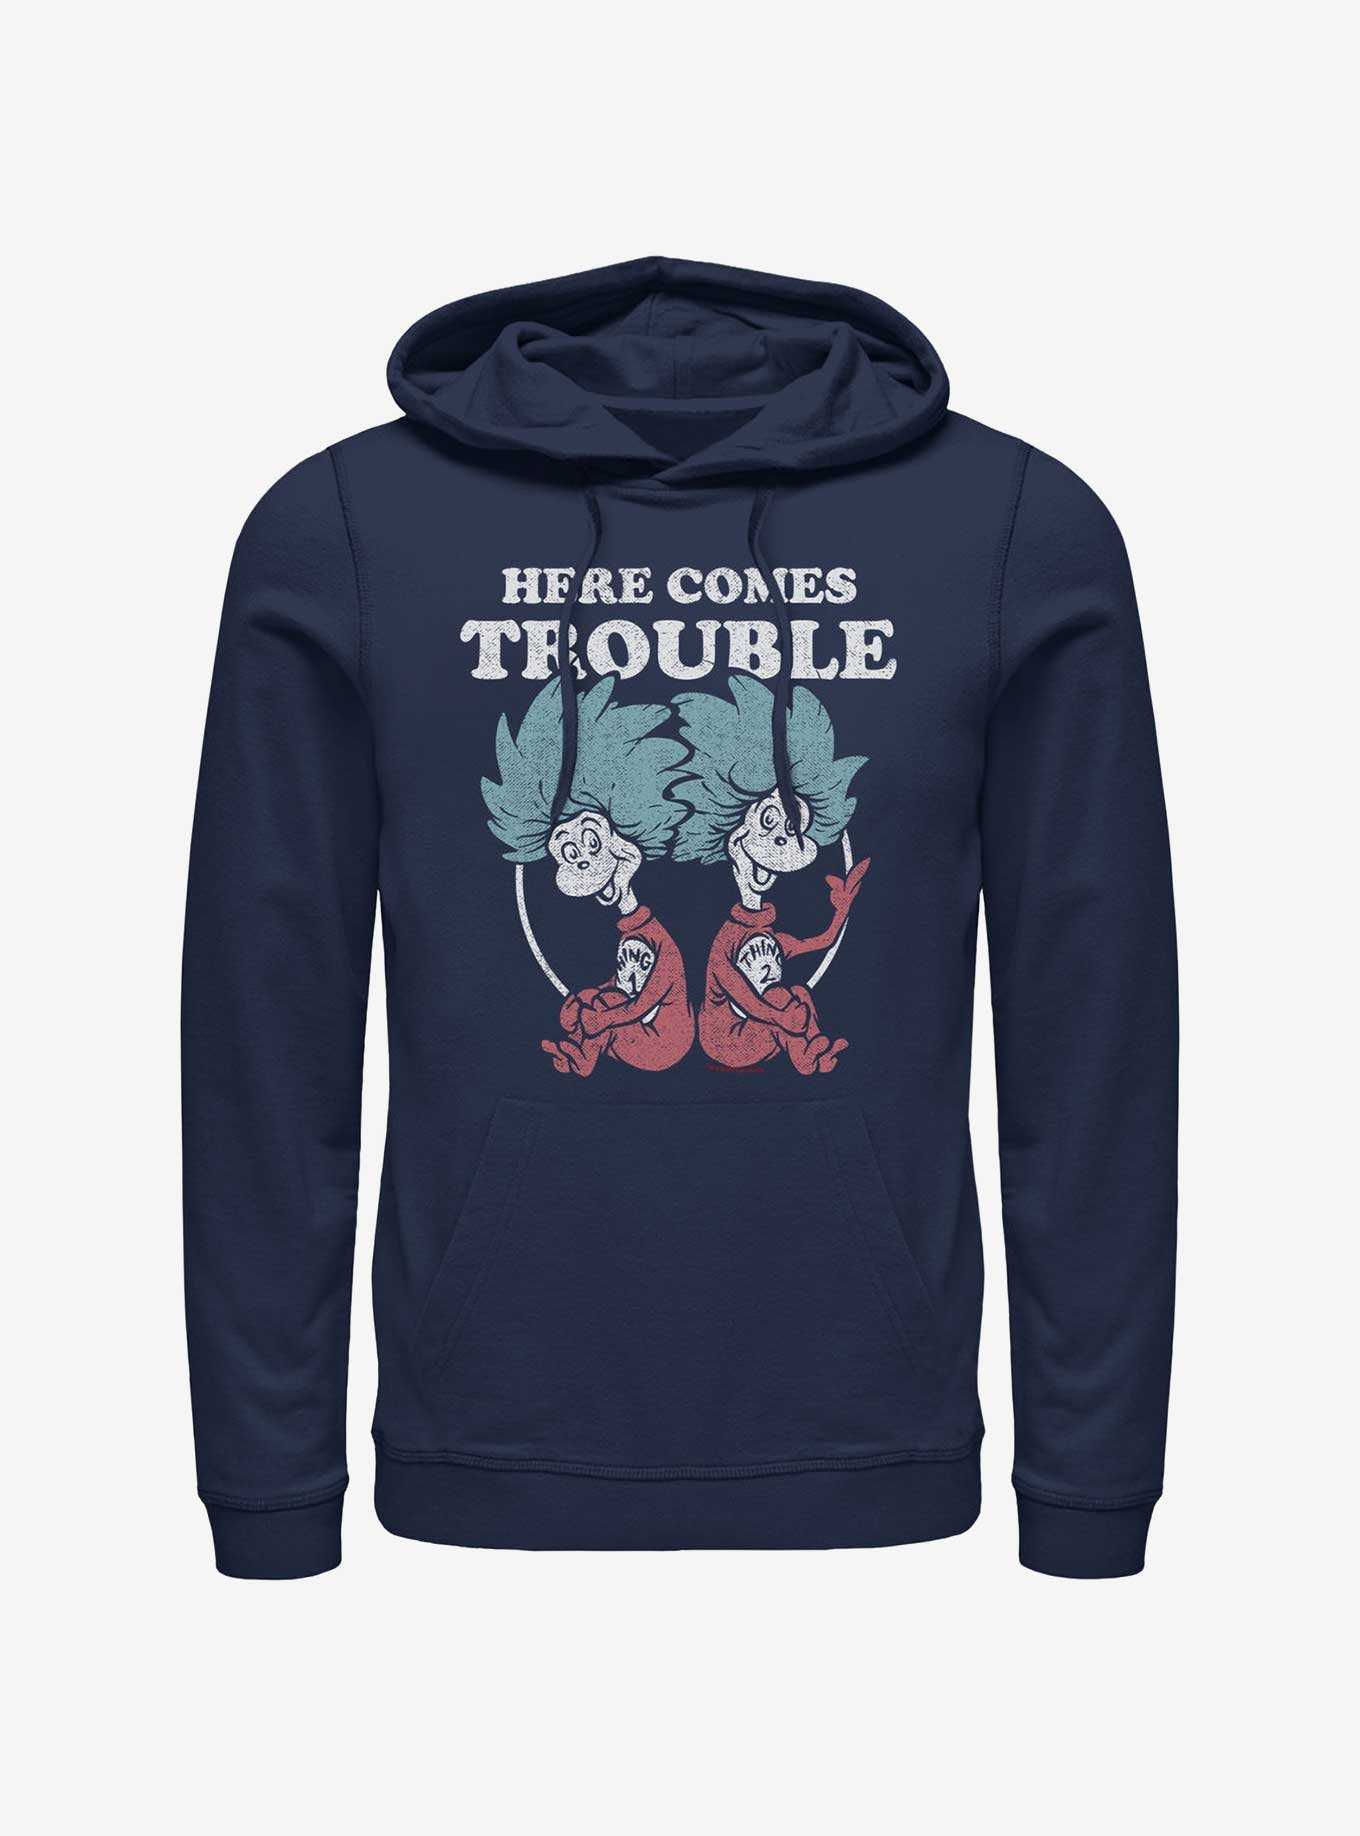 Dr. Seuss Thing 1 and Thing 2 Trouble Hoodie, , hi-res